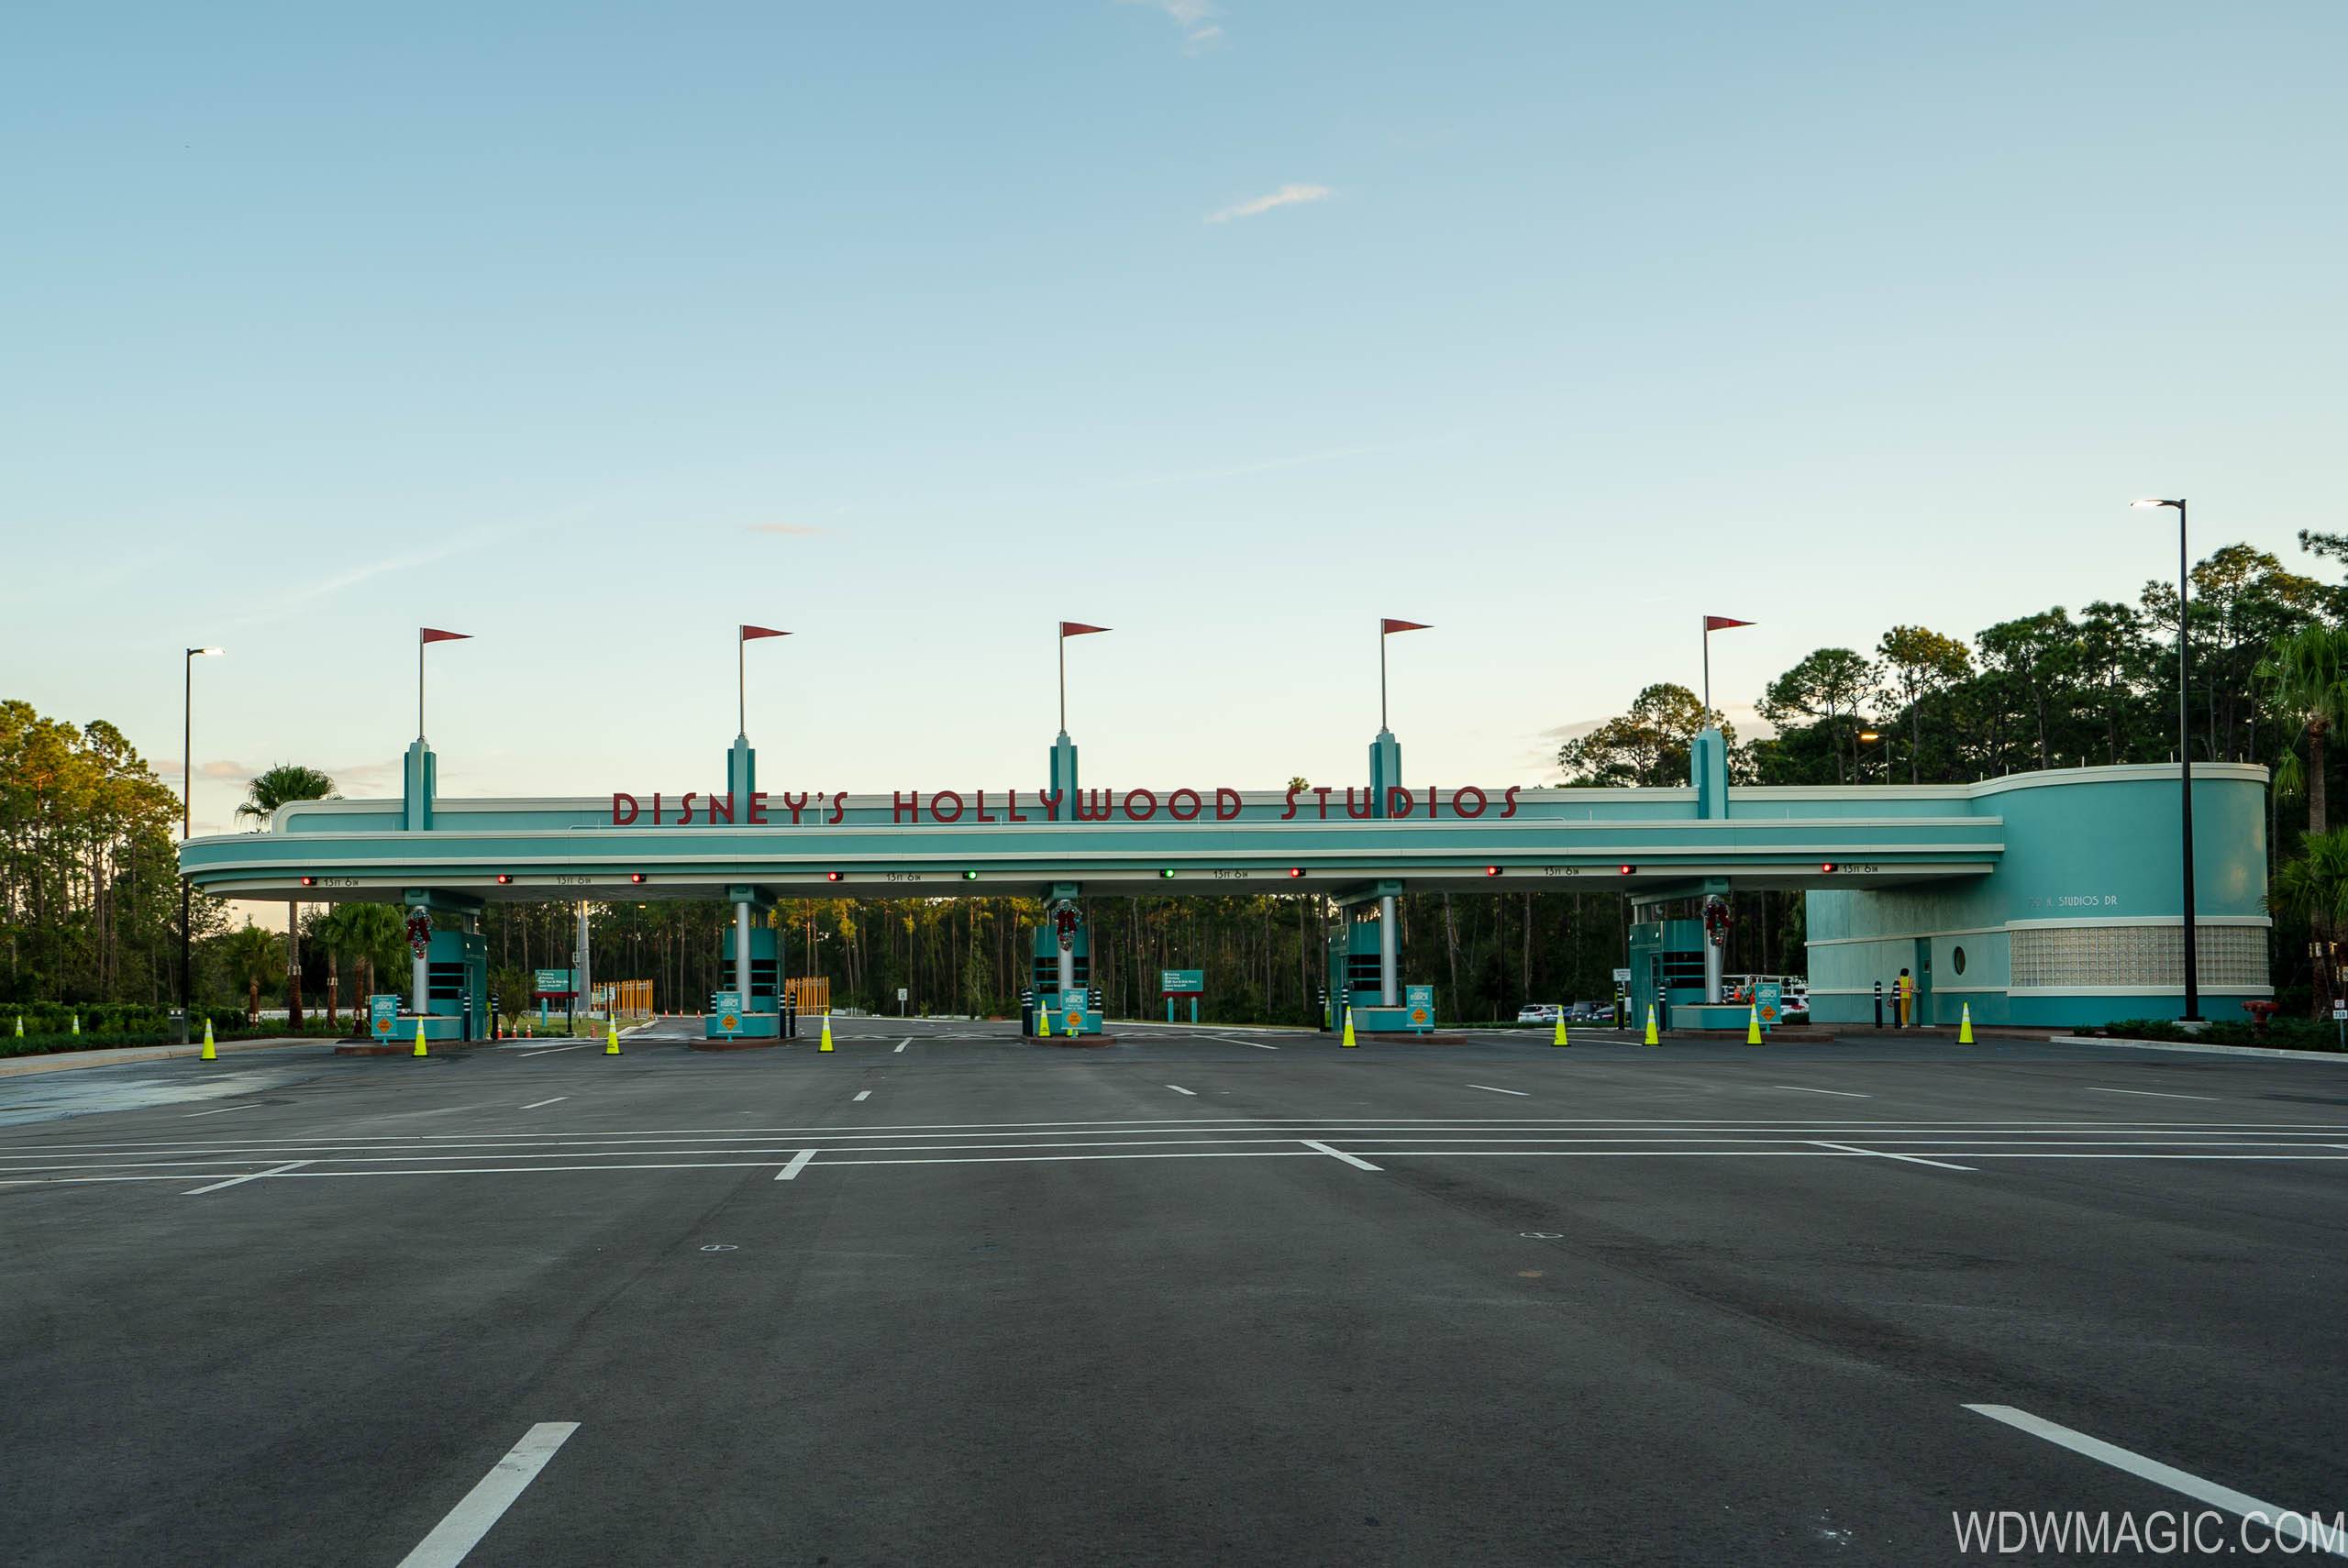 VIDEO - New vehicle entrance at Disney's Hollywood Studios now open